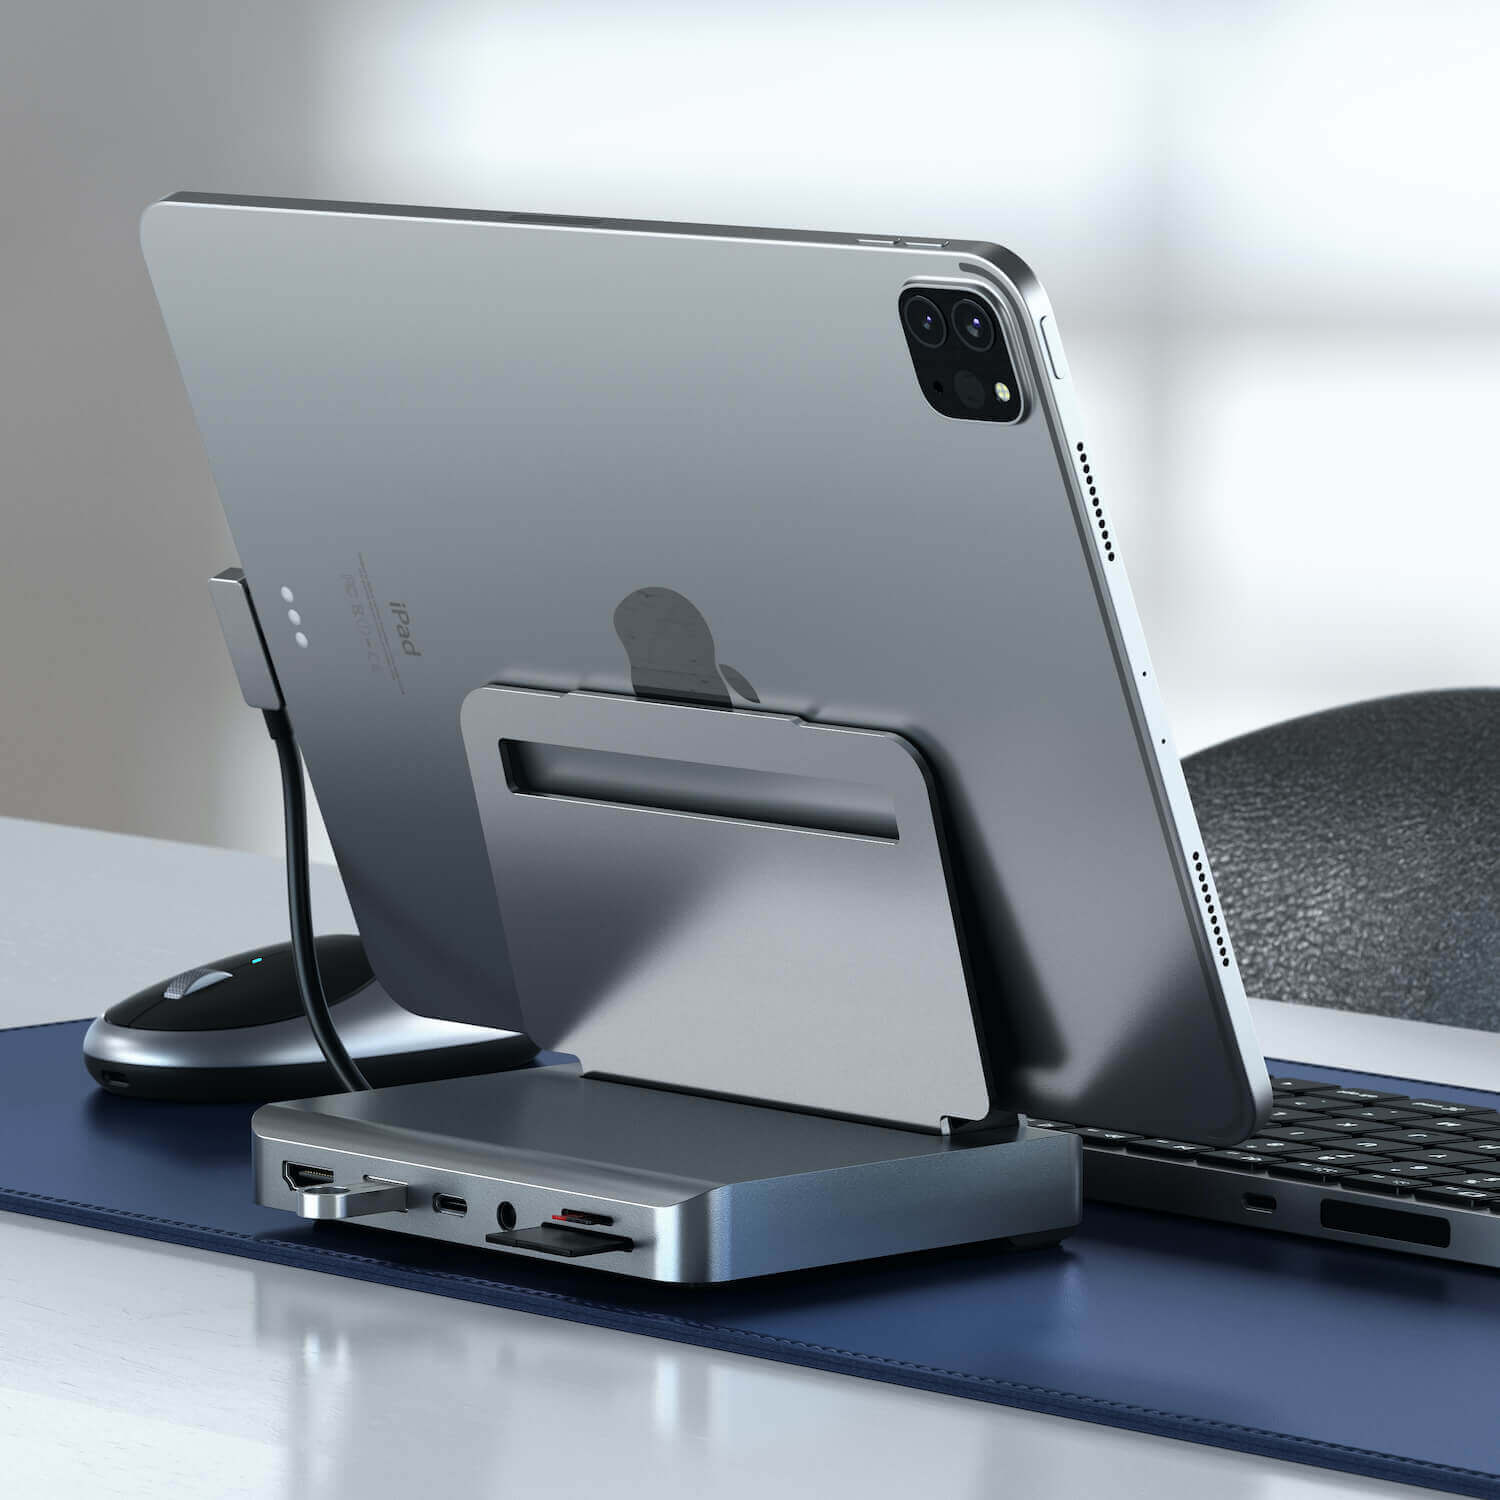 Satechi foldable stand and hub for iPad Pro